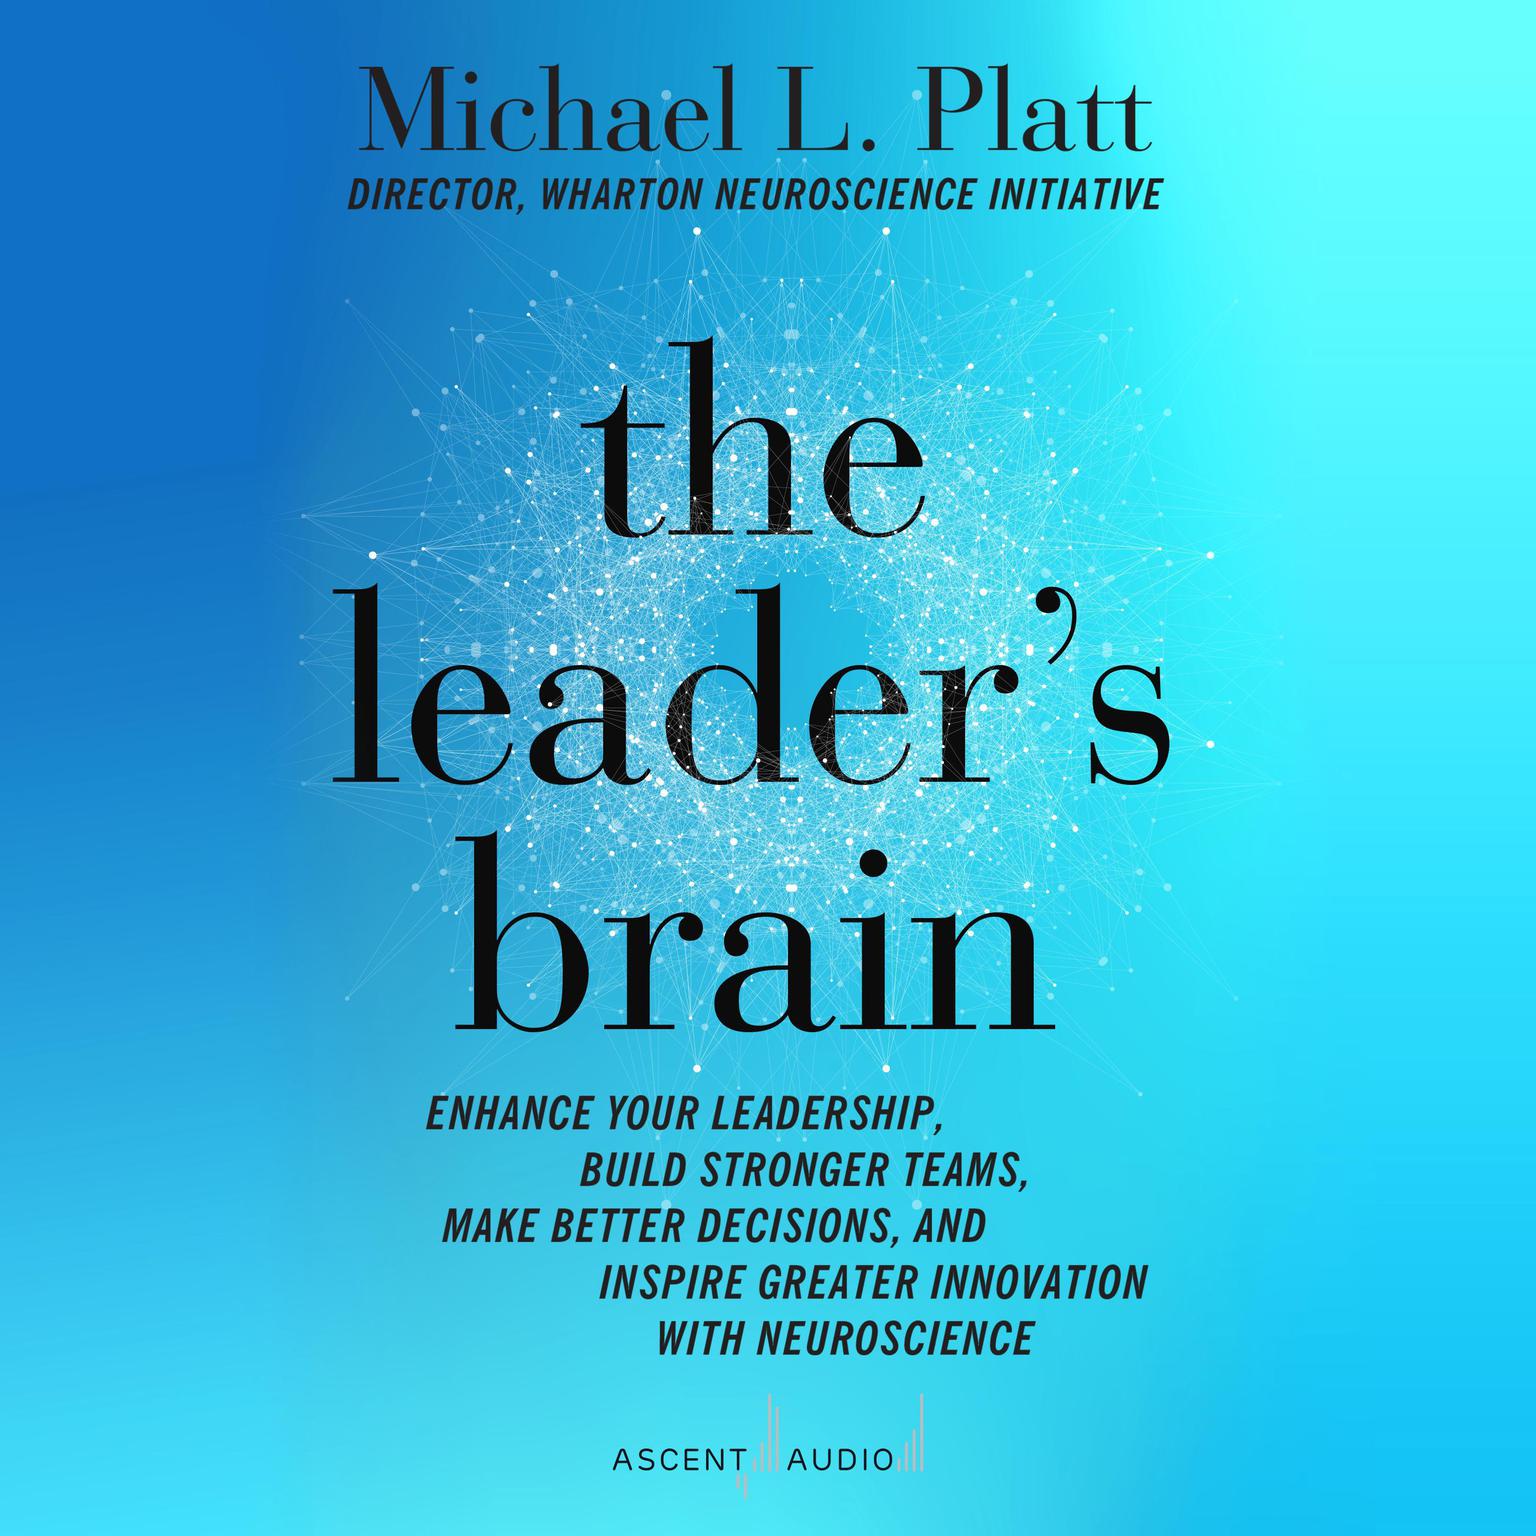 The Leaders Brain: Enhance Your Leadership, Build Stronger Teams, Make Better Decisions, and Inspire Greater Innovation with Neuroscience Audiobook, by Michael L. Platt